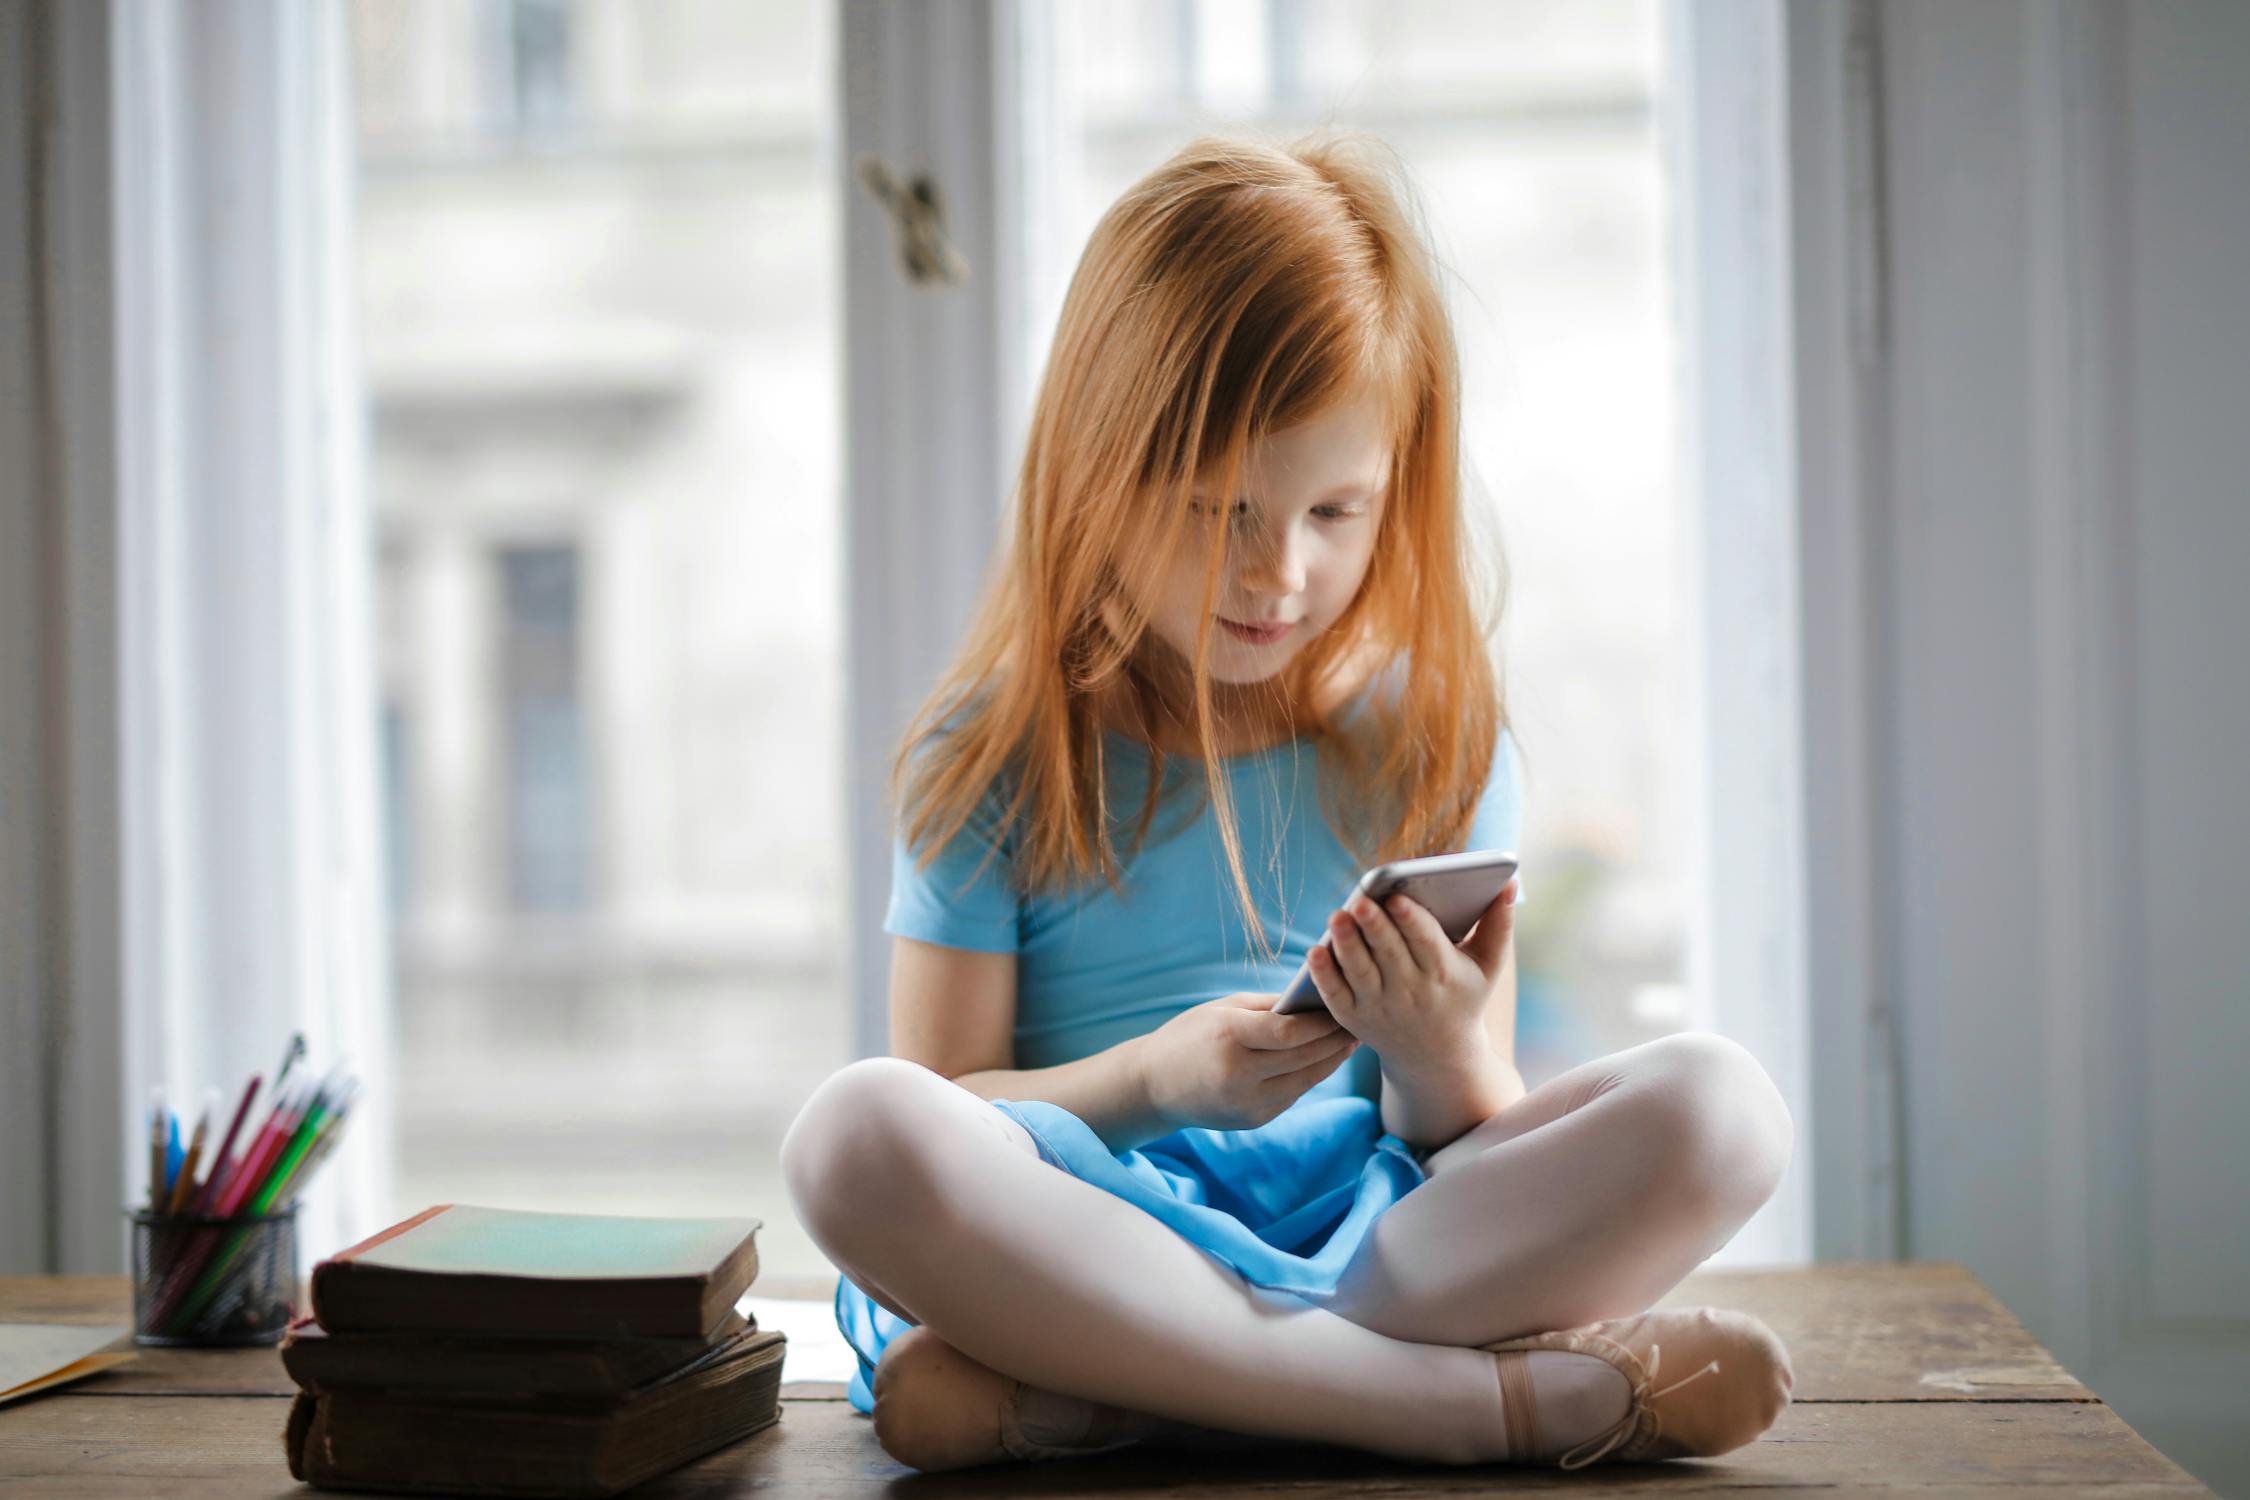 Child with phone Photo by Andrea Piacquadio from Pexels: https://www.pexels.com/photo/calm-small-ginger-girl-sitting-on-table-and-using-smartphone-in-light-living-room-3755620/